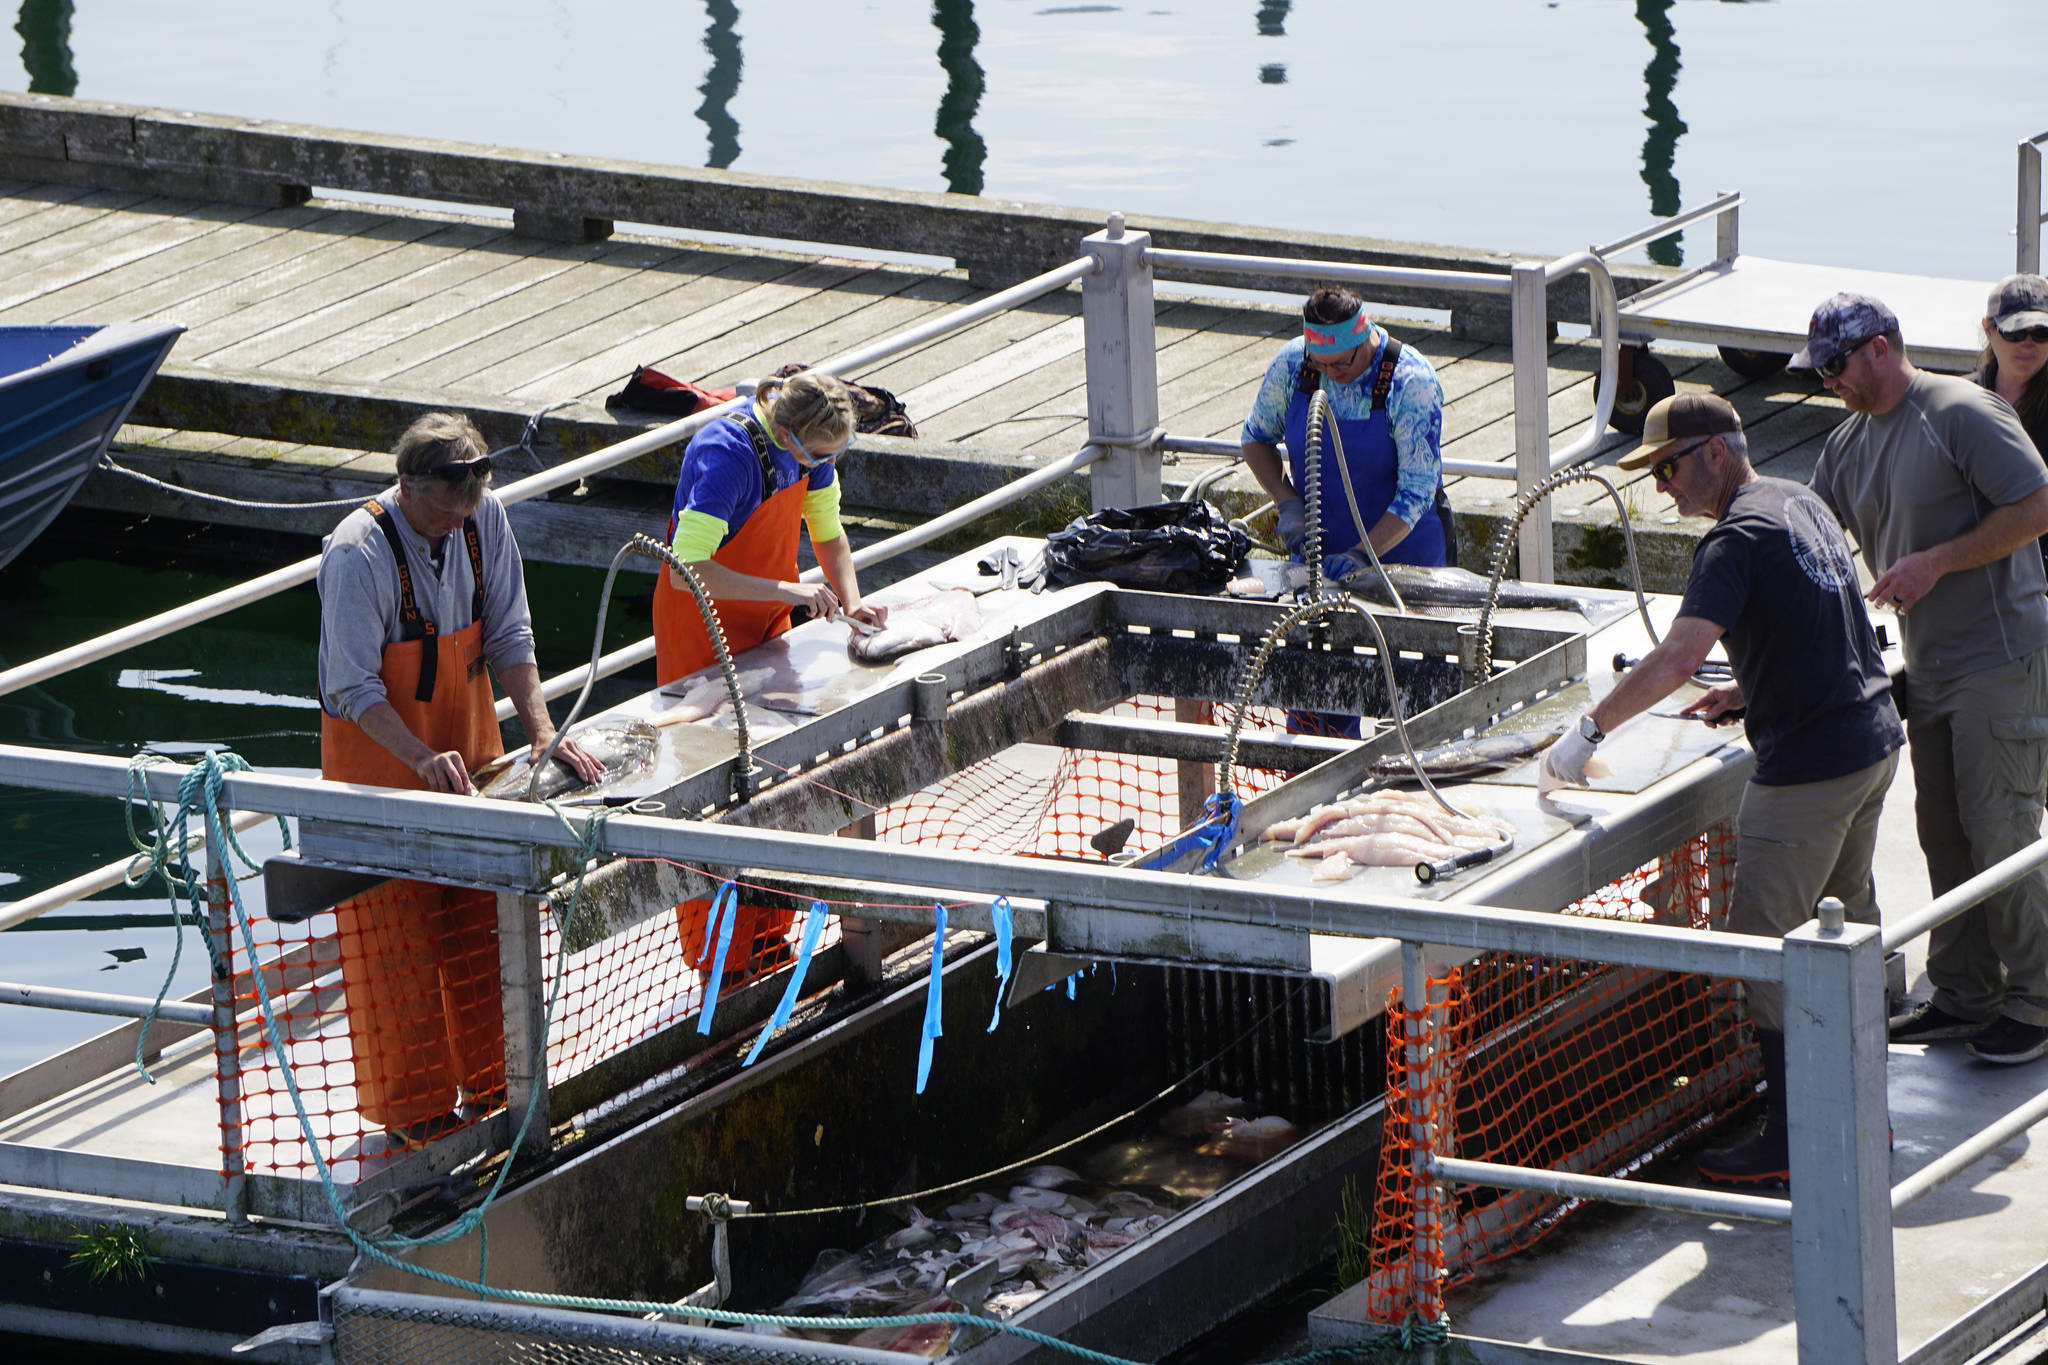 Anglers clean the day's catch on Sunday, July 18, 2021, at the fish cleaning tables in the Seldovia harbor in Seldovia, Alaska. (Photo by Michael Armstrong/Homer News)